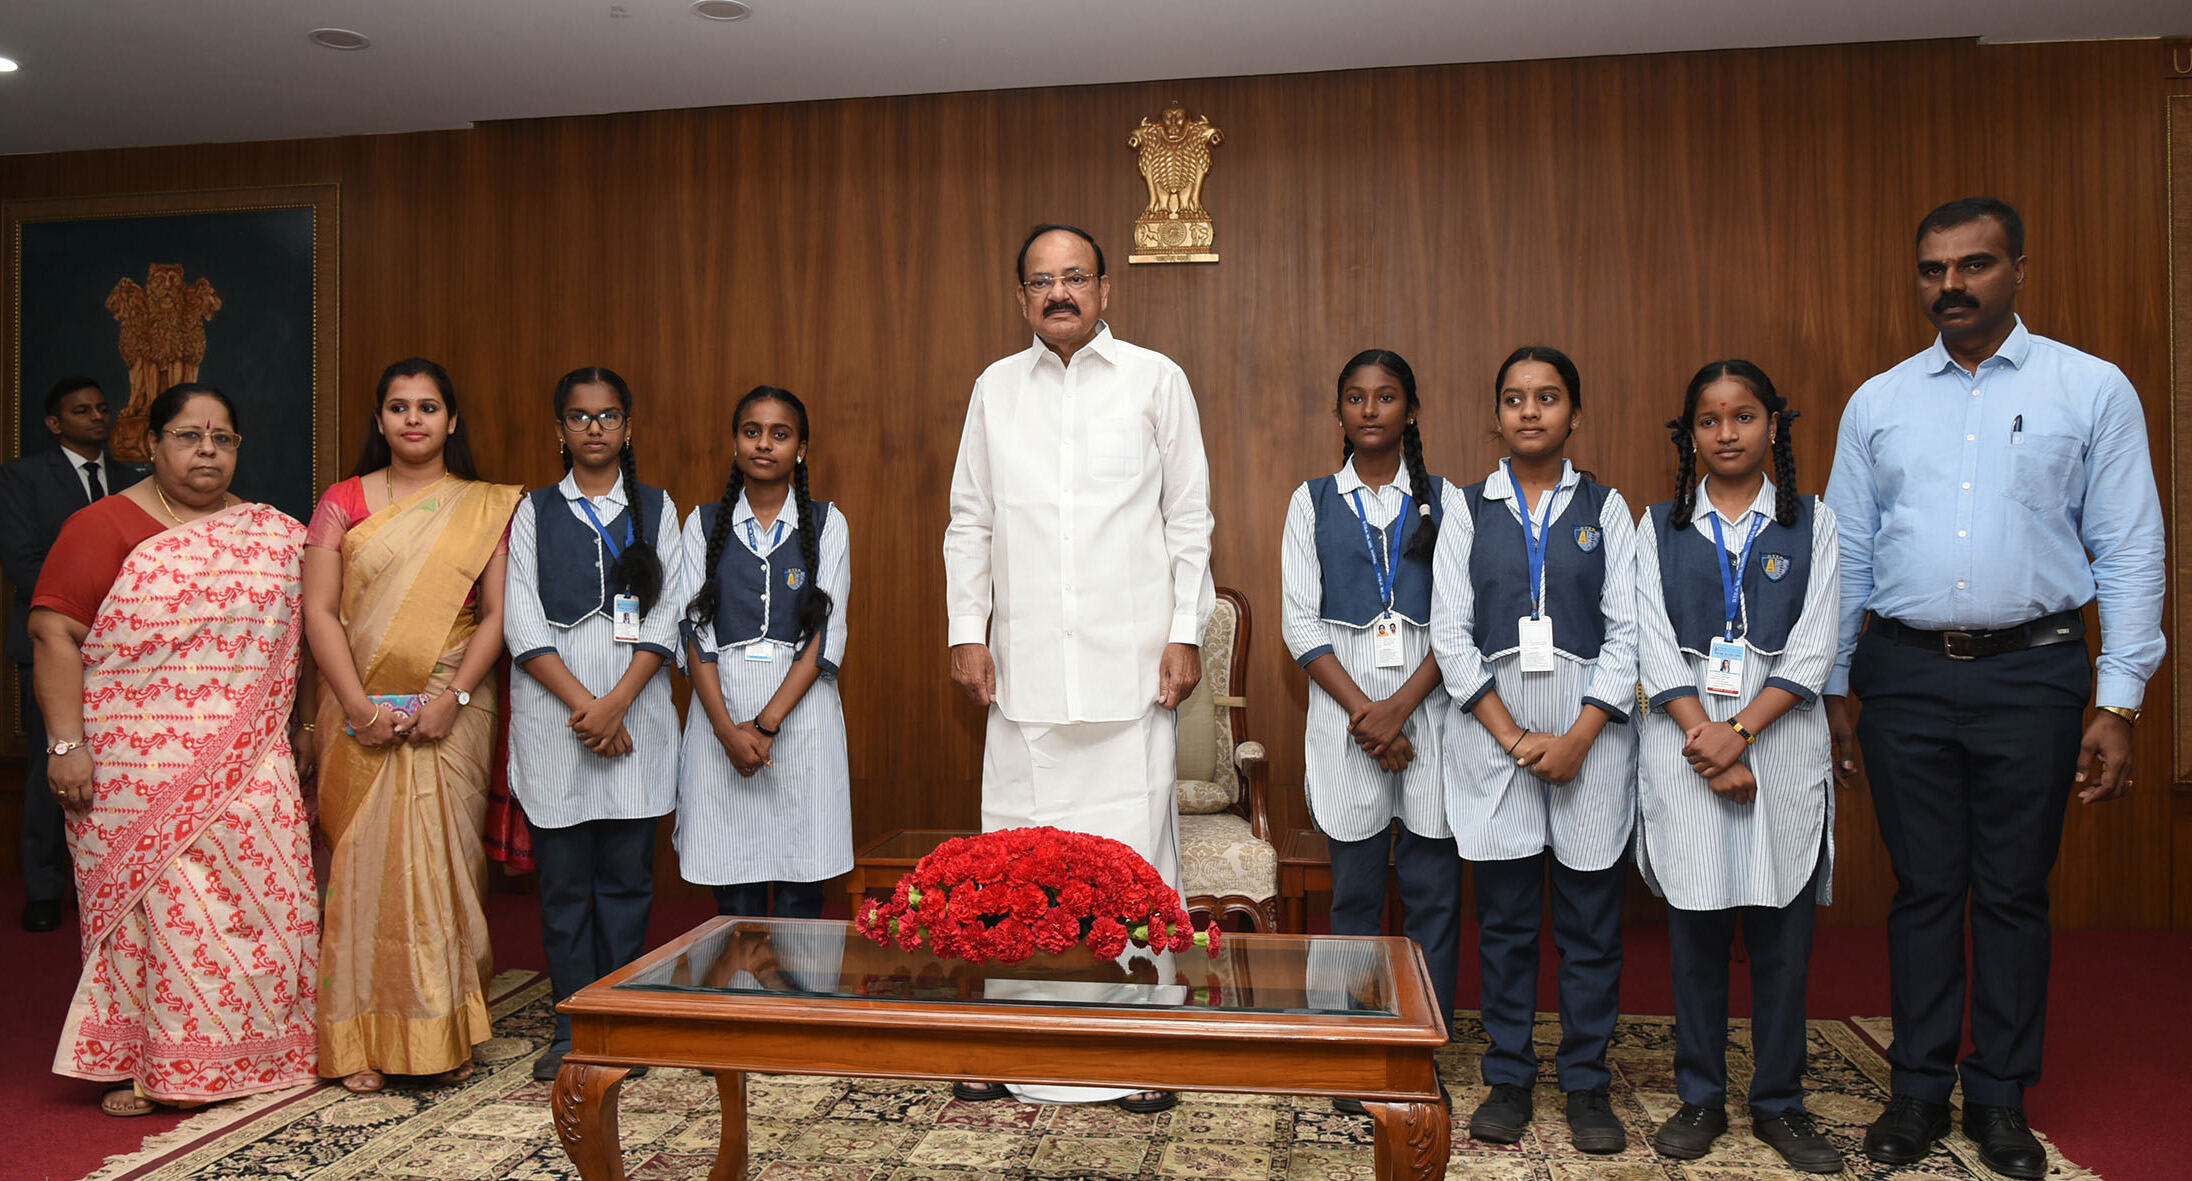 The Vice President, M. Venkaiah Naidu at an event to interact with Teachers from Delhi Tamil Education Association Schools, on the occasion of Teachers’ Day, in New Delhi on September 05, 2019.